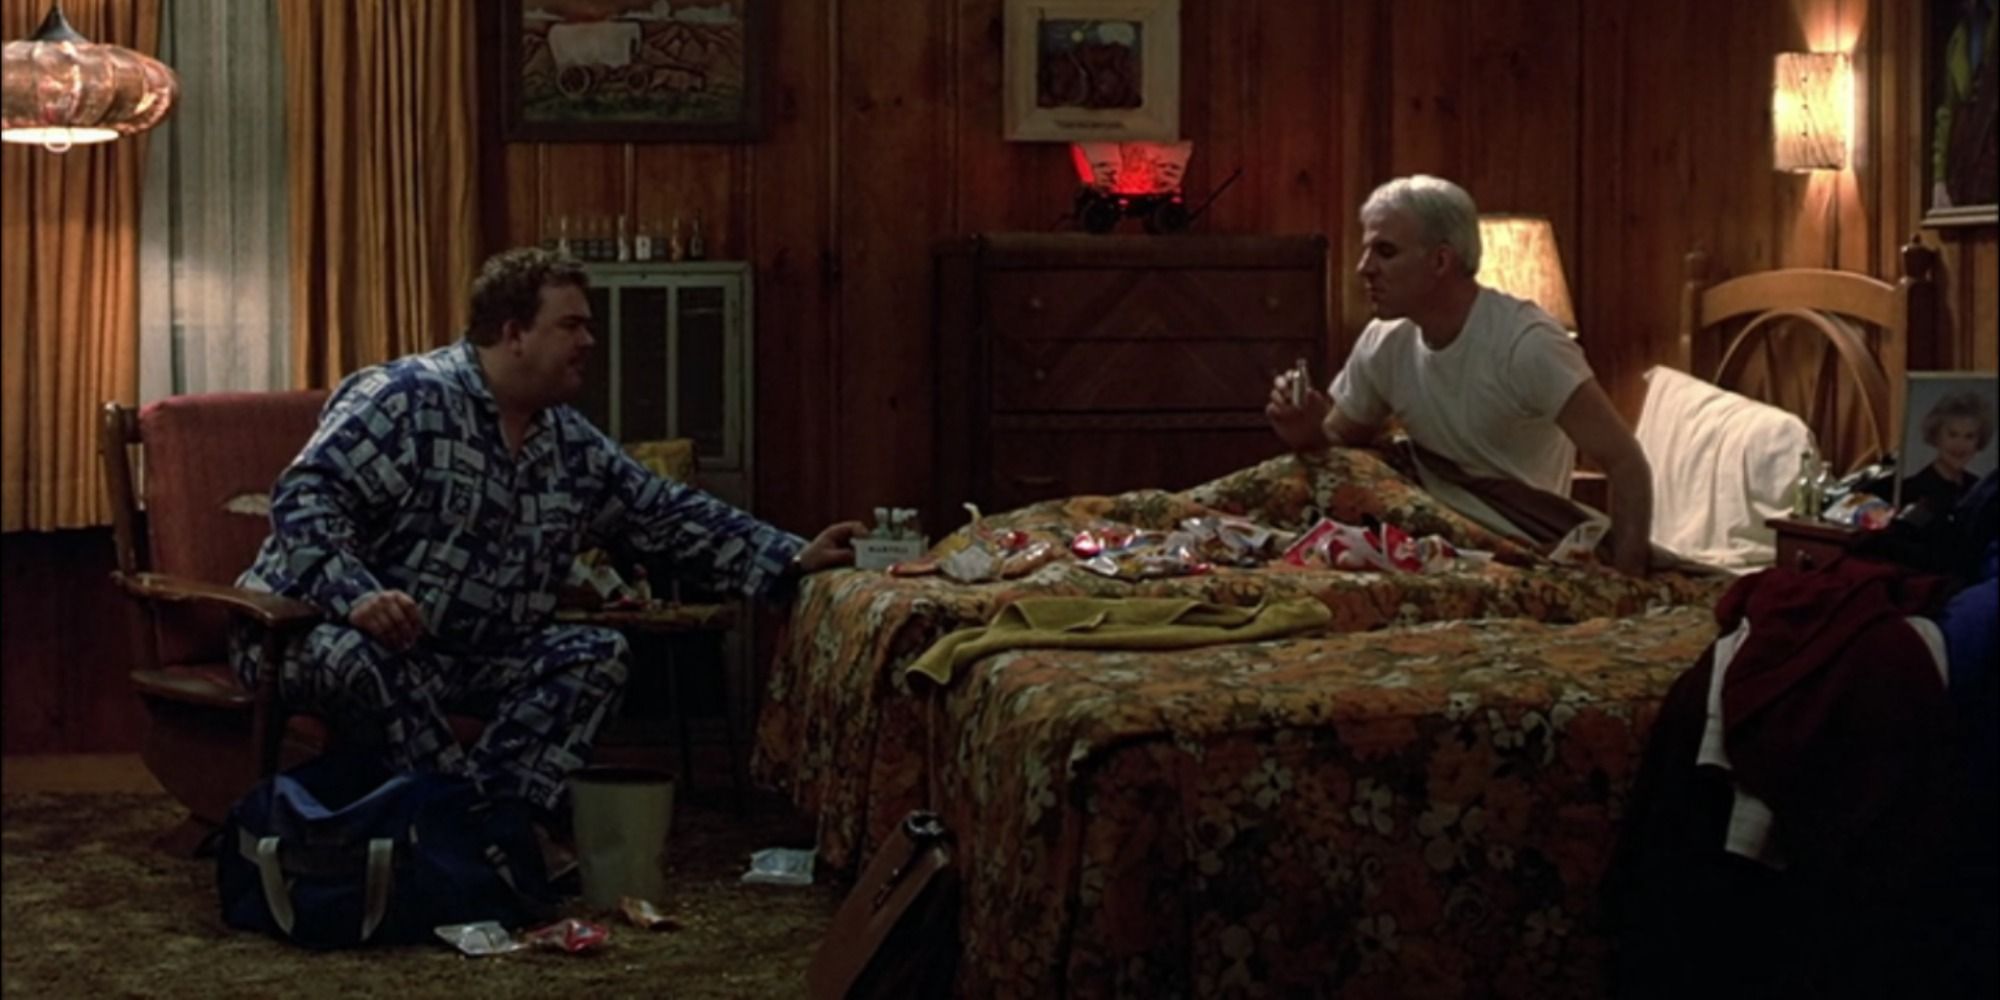 Del and Neal eating and drinking together in the motel room in Planes, Trains and Automobiles